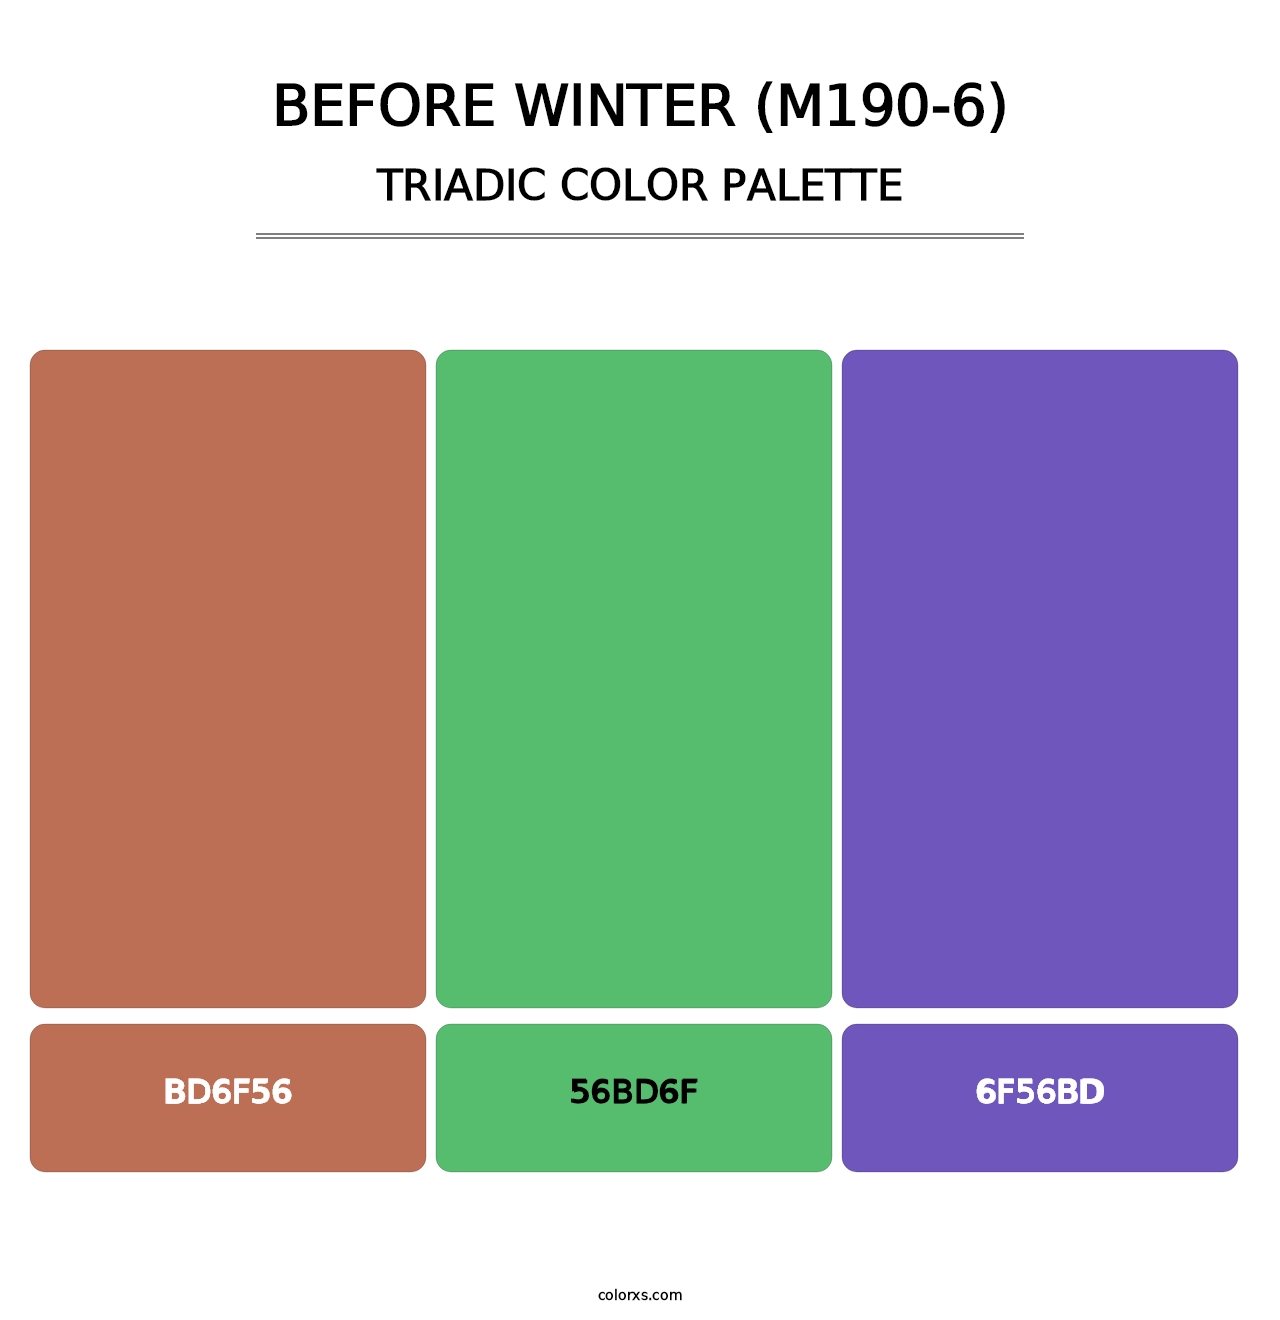 Before Winter (M190-6) - Triadic Color Palette